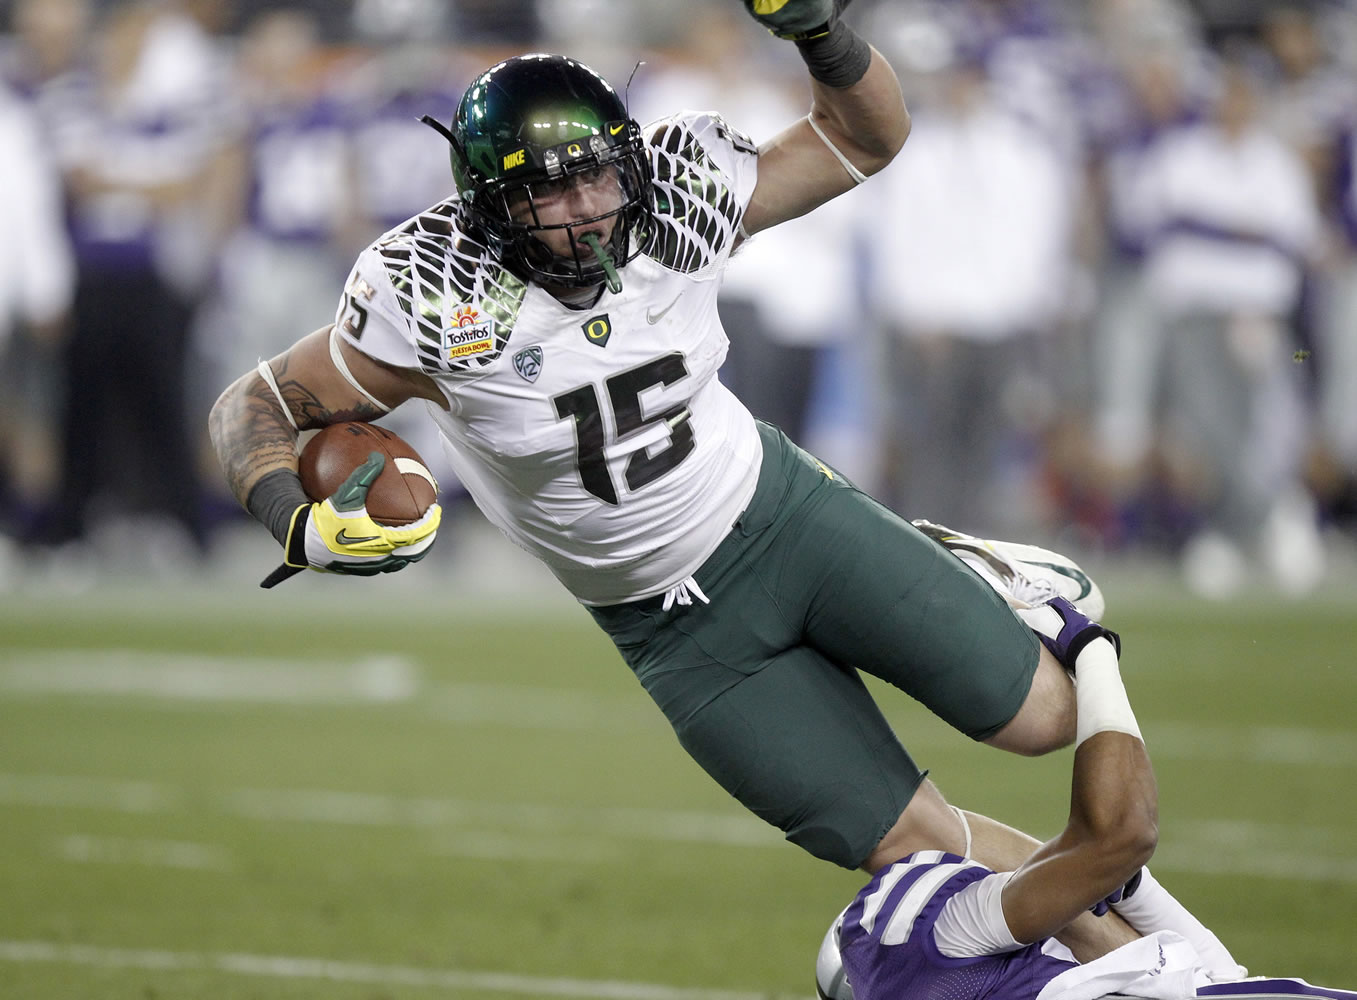 Oregon tight end Colt Lyerla, trying to escape the grasp of Kansas State's Jerard Milo during the Fiesta Bowl in January, left the Ducks program this week.